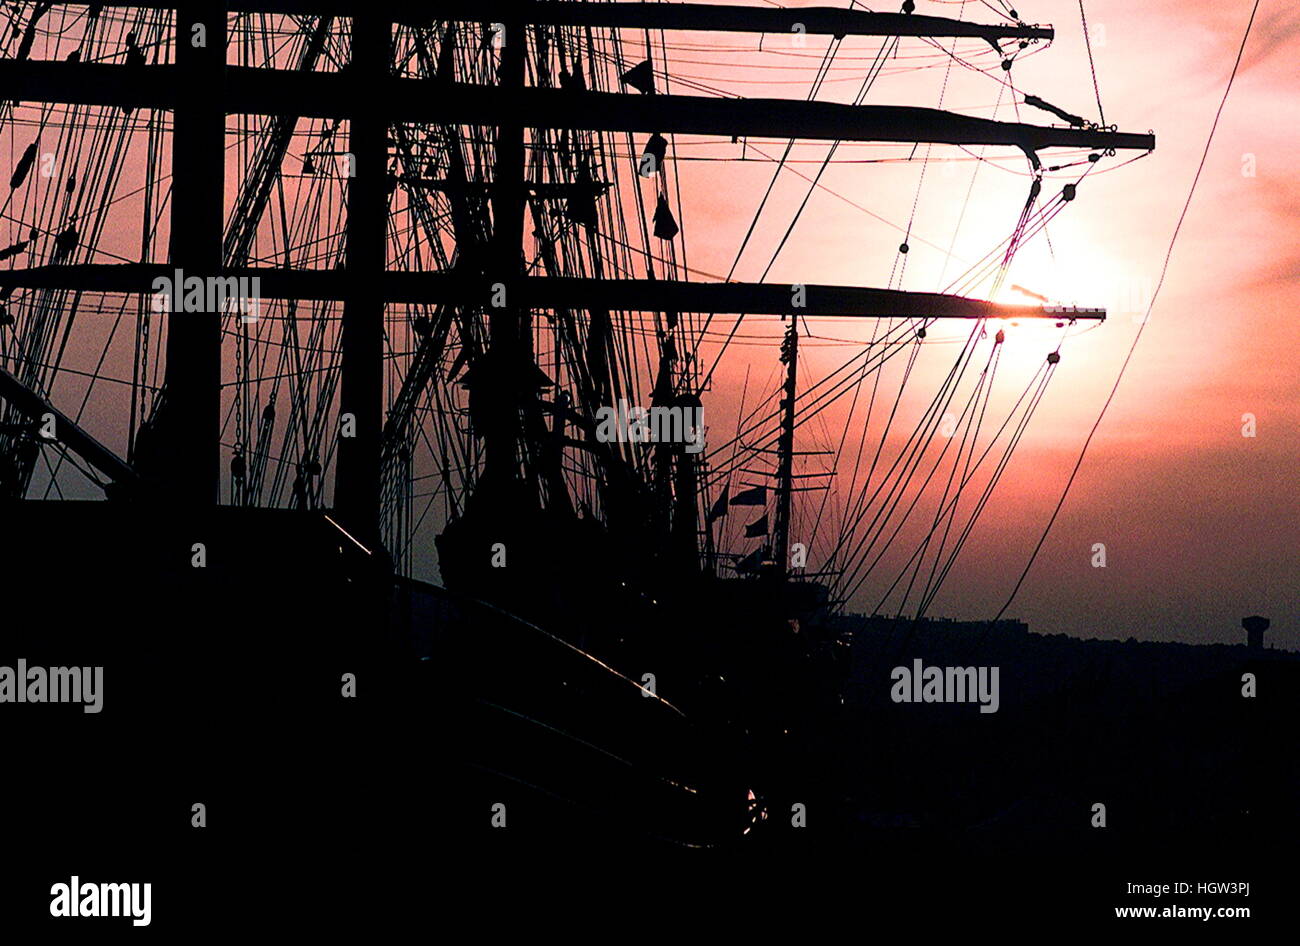 AJAXNETPHOTO. 1989. ROUEN, FRANCE. - TALL SHIPS GATHER ON SEINE - SUN SETS BEHIND THE YARDS AND MASTS OF TALL SHIPS MOORED IN THE CITY FOR THE 'VOILE DE LA LIBERTE' PARADE OF SAIL.  PHOTO:JONATHAN EASTLAND/AJAX  REF:M7 1989 Stock Photo